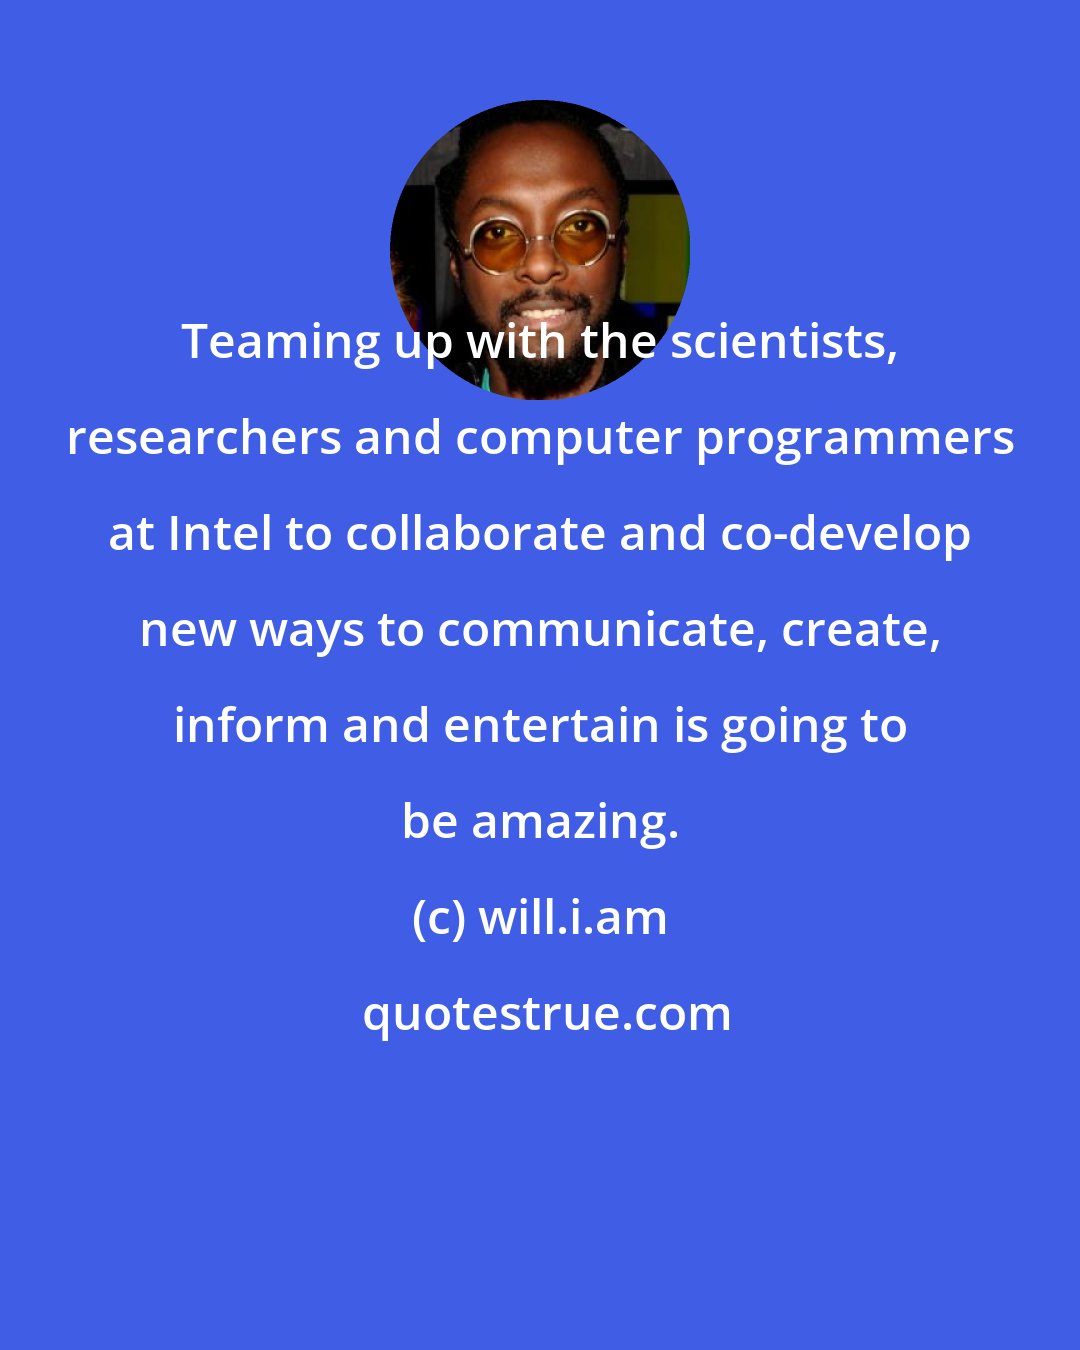 will.i.am: Teaming up with the scientists, researchers and computer programmers at Intel to collaborate and co-develop new ways to communicate, create, inform and entertain is going to be amazing.